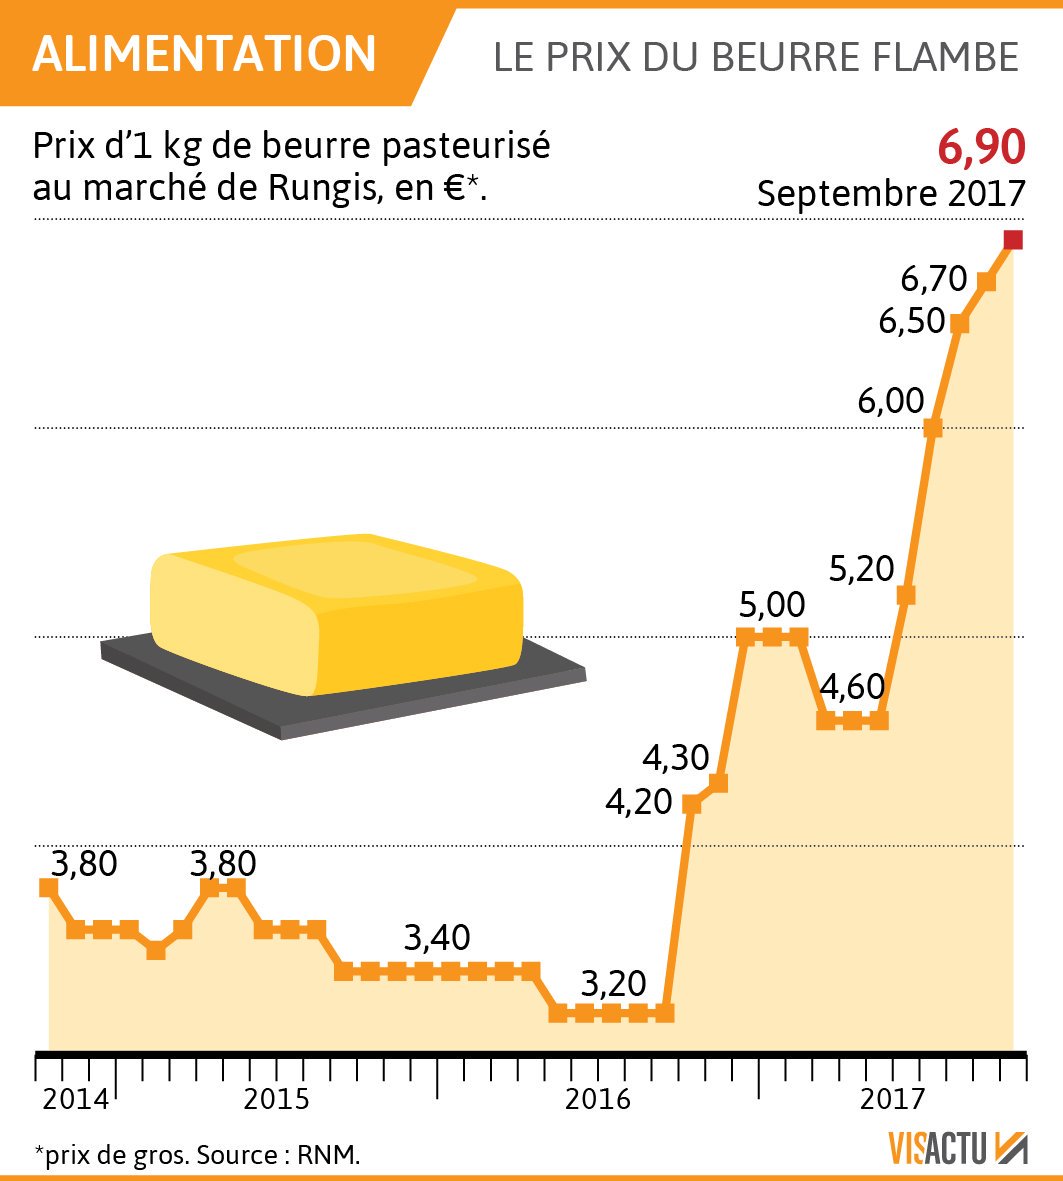 Butter Price Chart